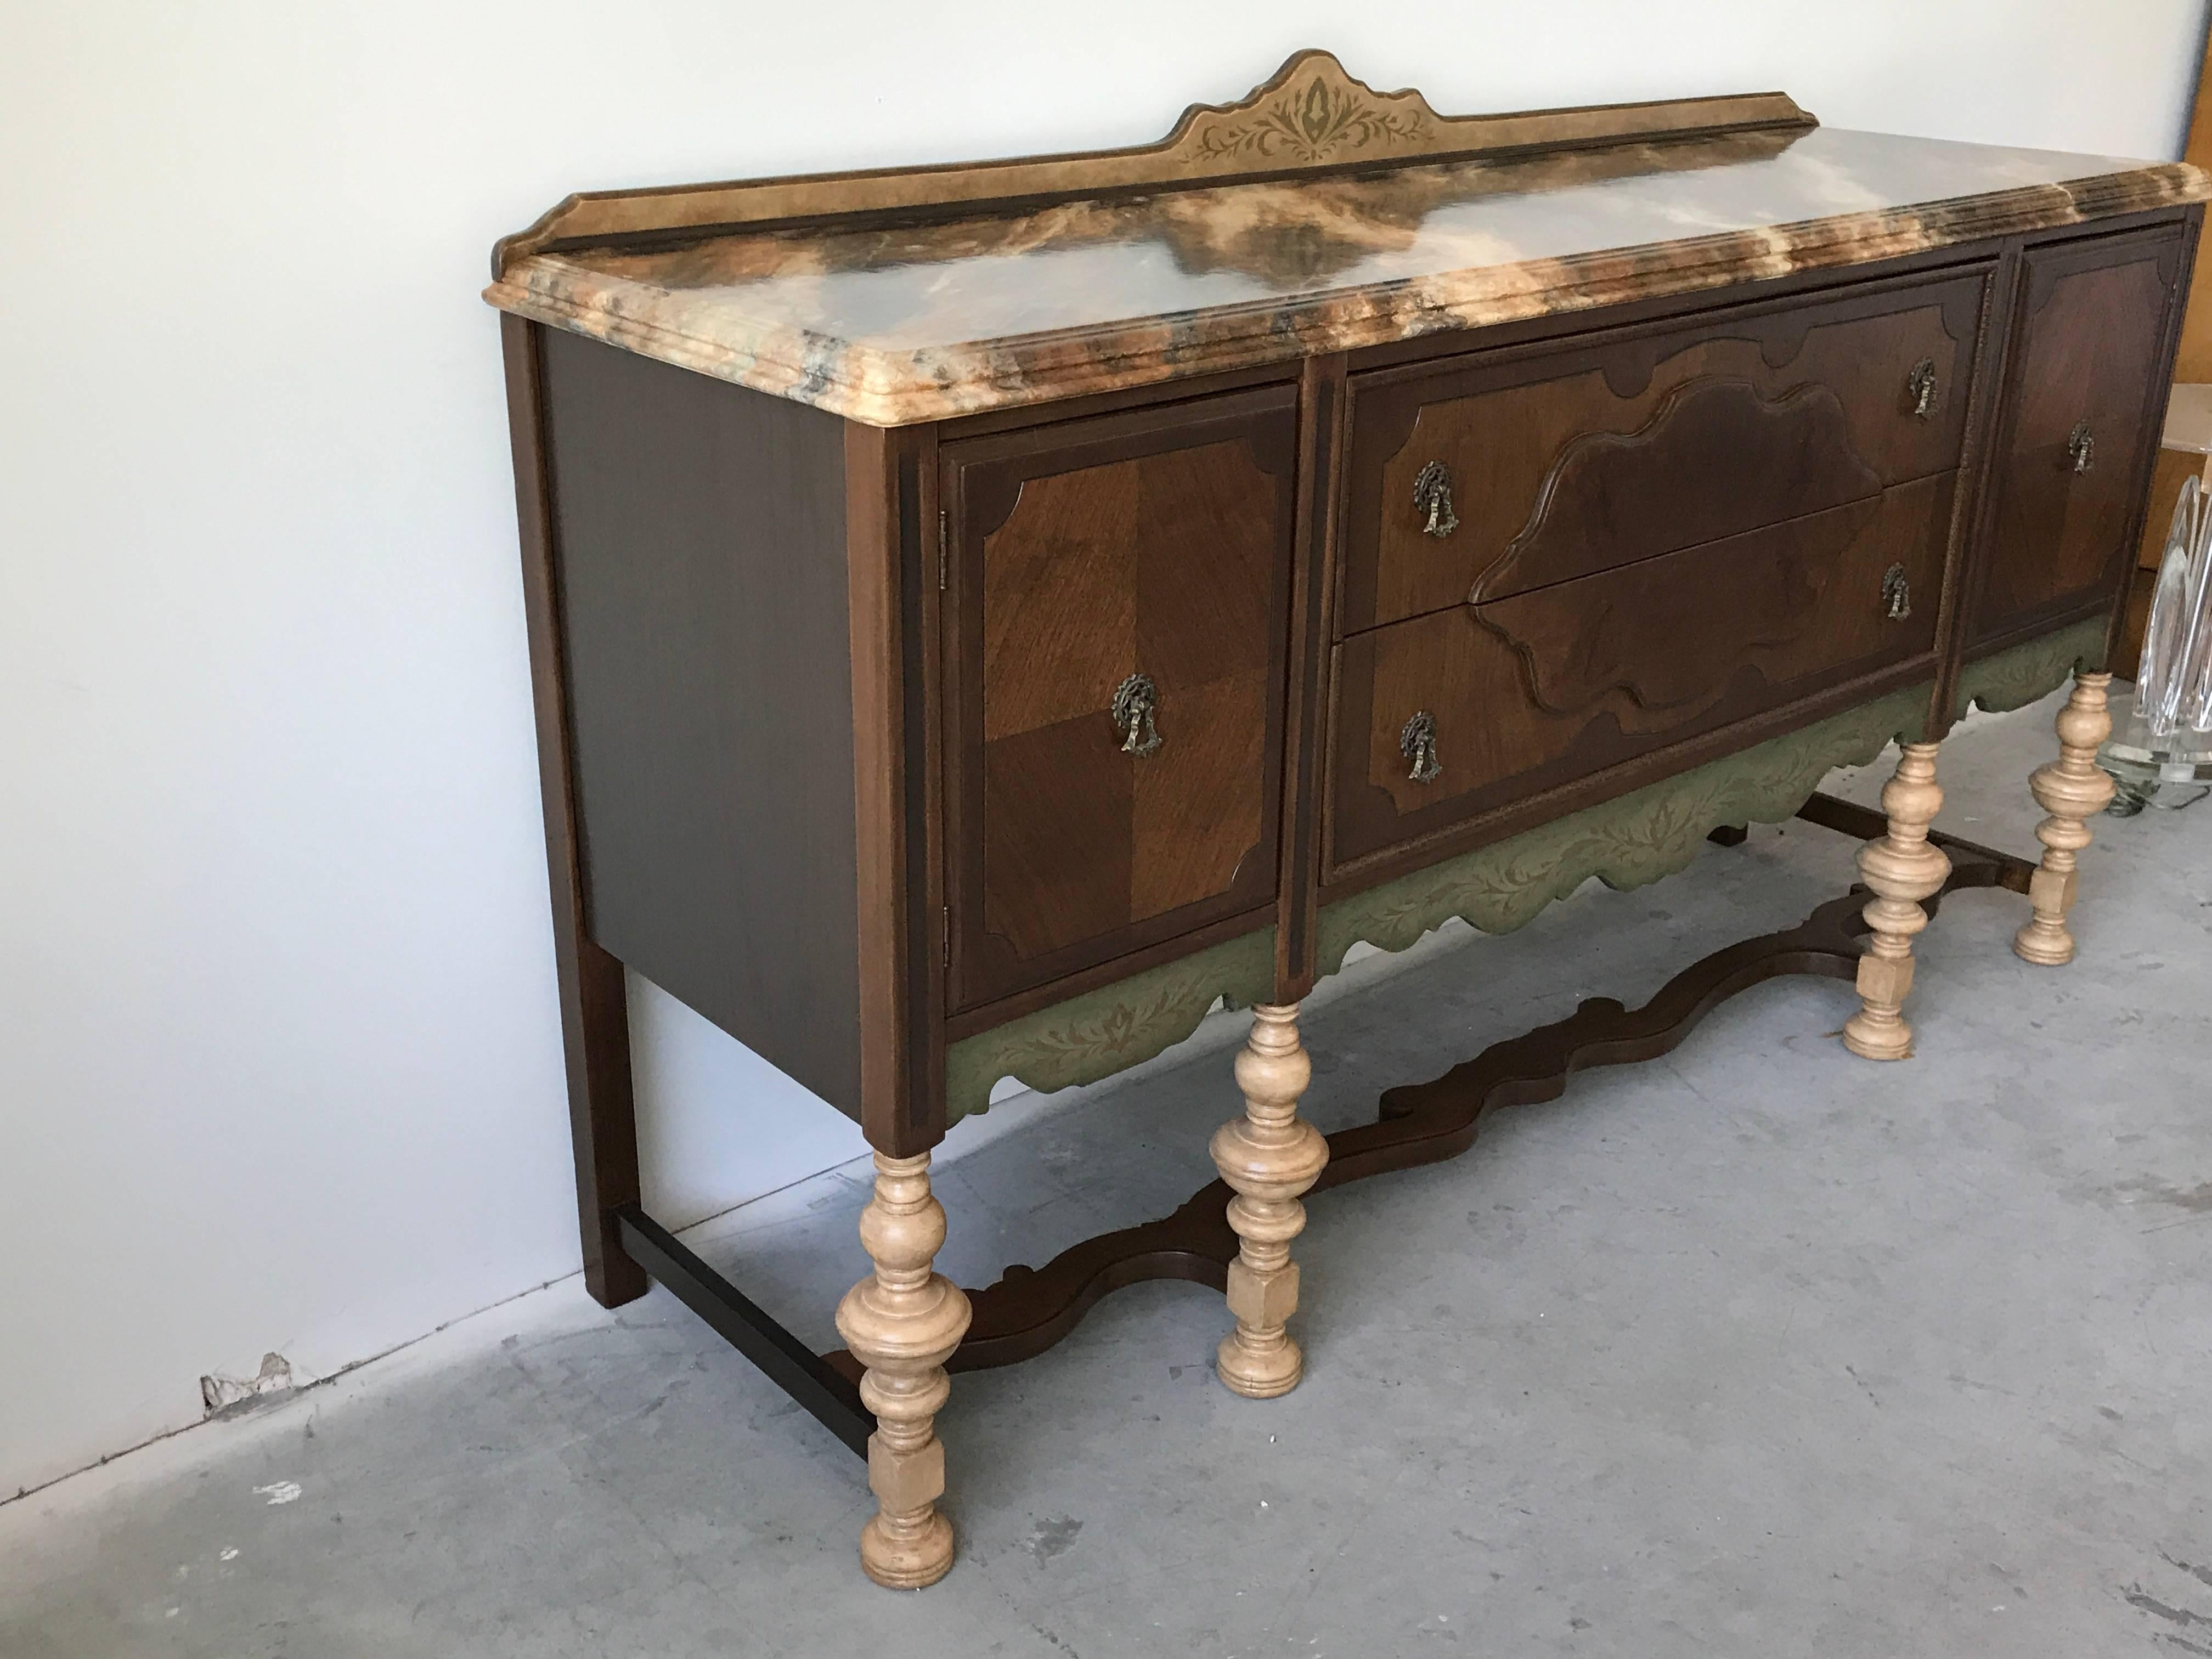 Offered is a stunning, 19th century, oak buffet sideboard. The piece has been completely restored, re-stained, and repainted, complimented by a gorgeous hand painted faux-marble top and hand painted stencil-work. Ample storage, with two large